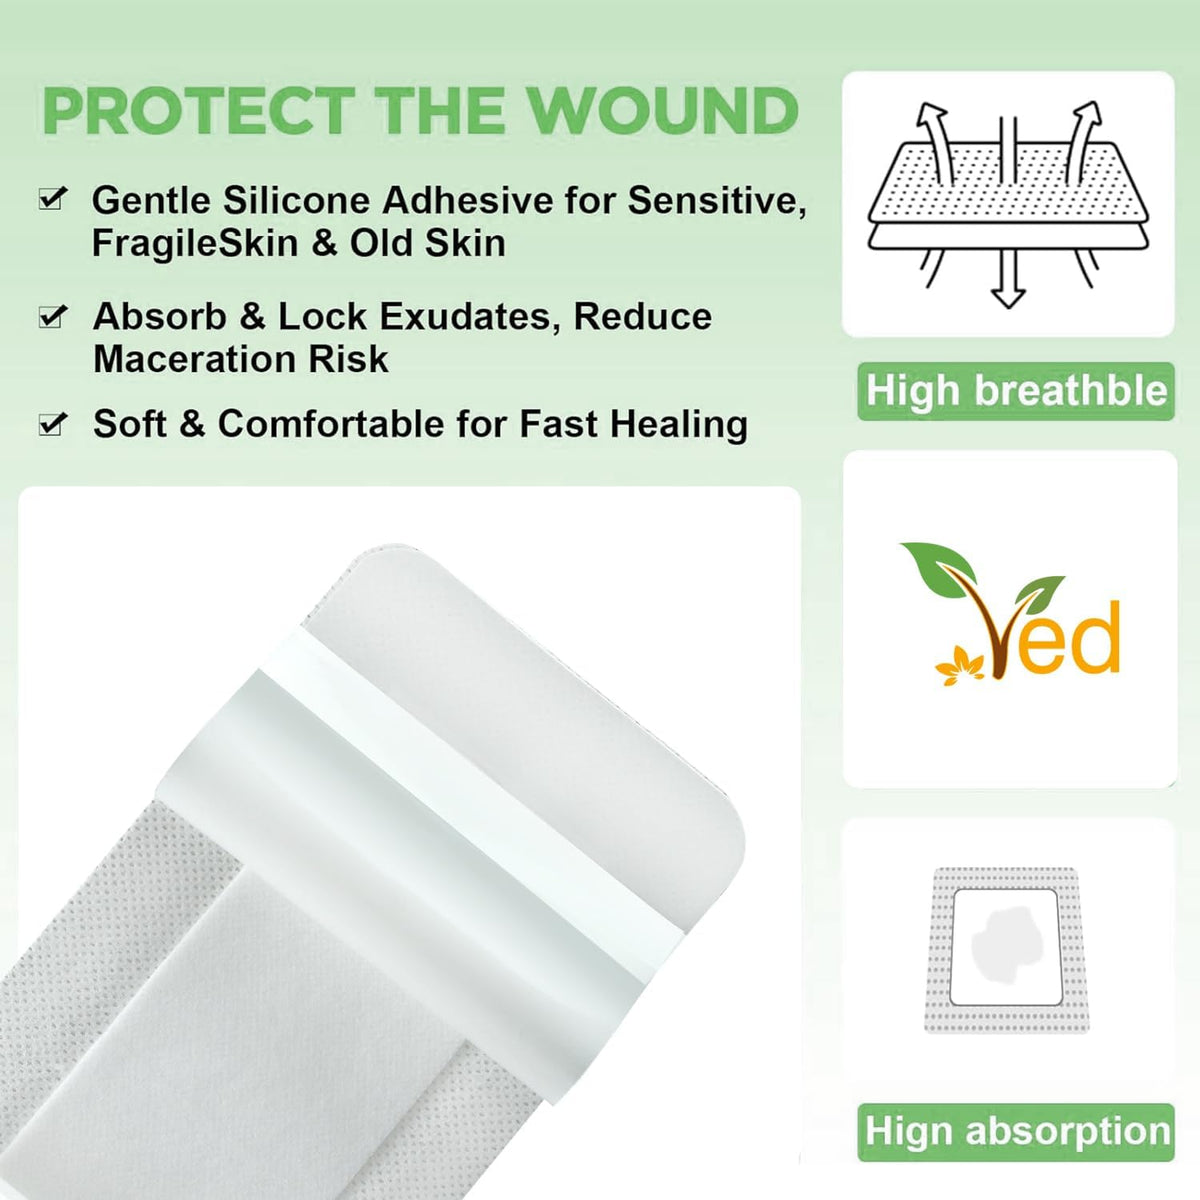 VED Dermapore Adhesive Wound Dressing- Suitable for cuts and grazes, Diabetic Leg ulcers, venous Leg ulcers, Small Pressure sores- Medium, 6 X 7cm (Pack of 100).